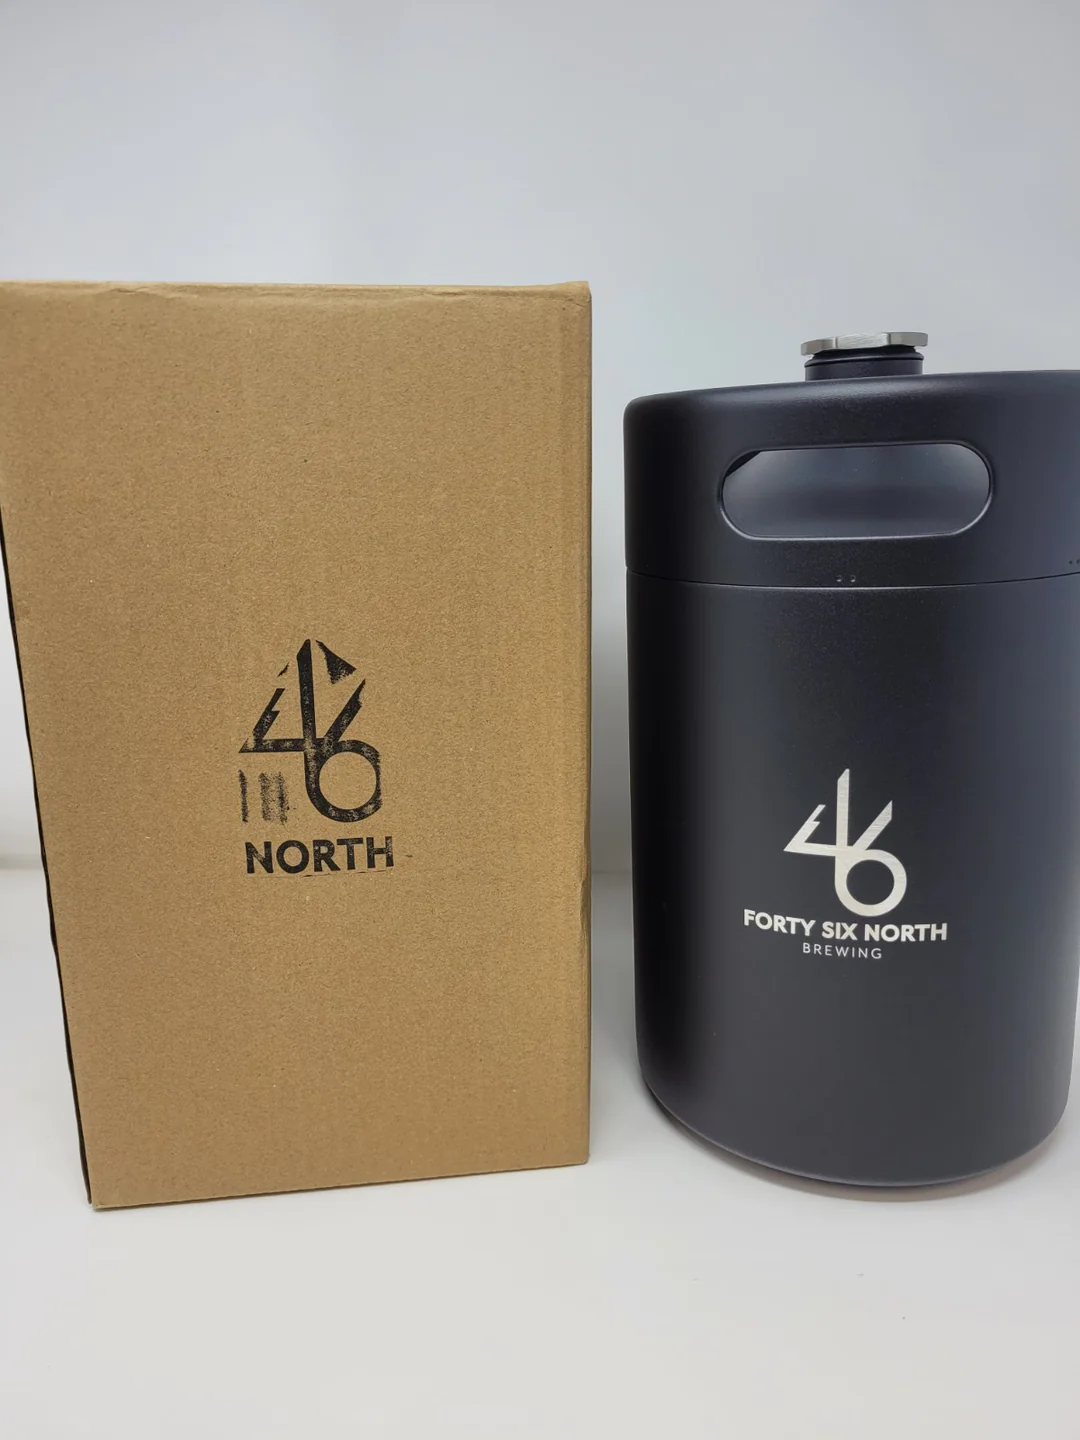 a black painted stainless steel growler next to a brown cardboard box of the same size, both printed with a 46 North logo.